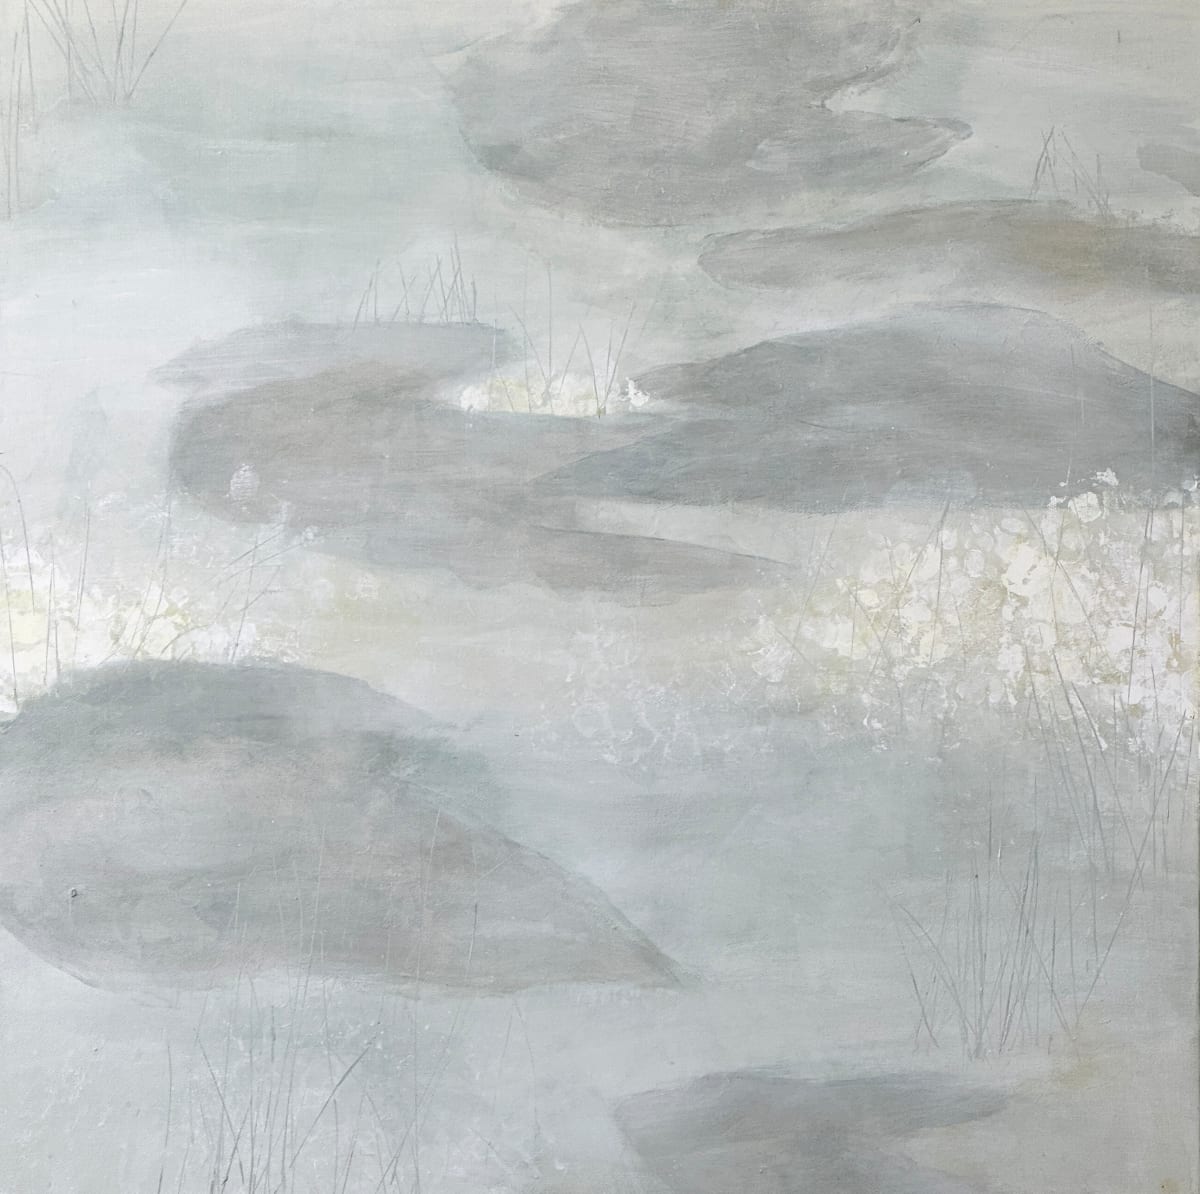 The Pond in February 2, From the Nature’s Botanics Portfolio, 2023, Acrylic on canvas, 24 x 24 inches. by Juanita 